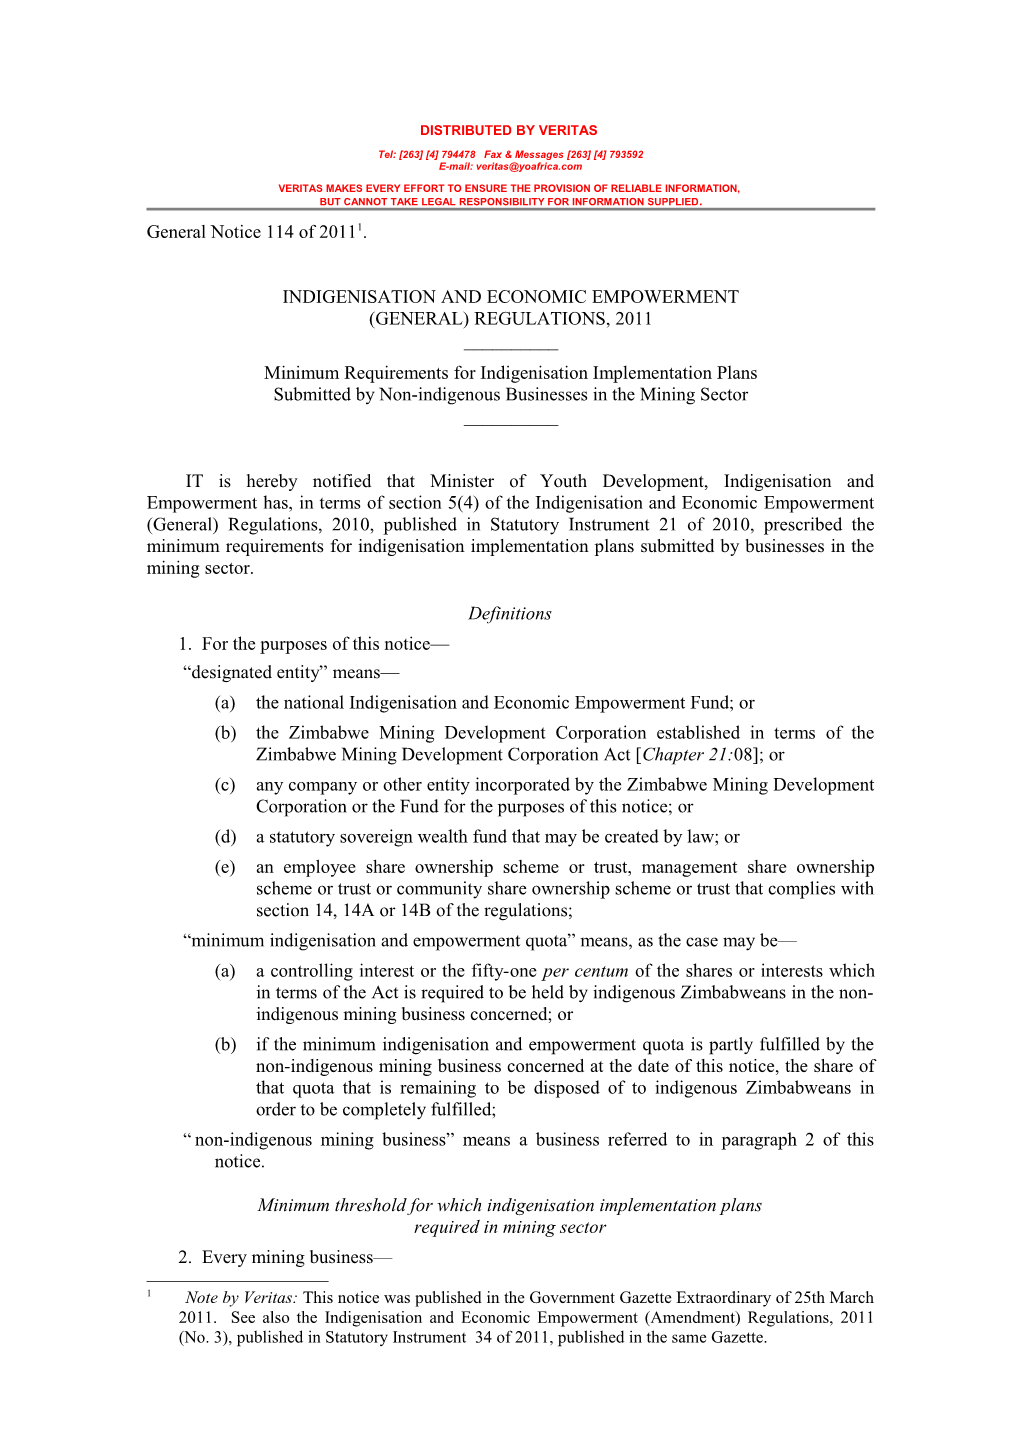 GN 2011-114 - Indigenisation &C - Minimum Requirements for Mining Sector